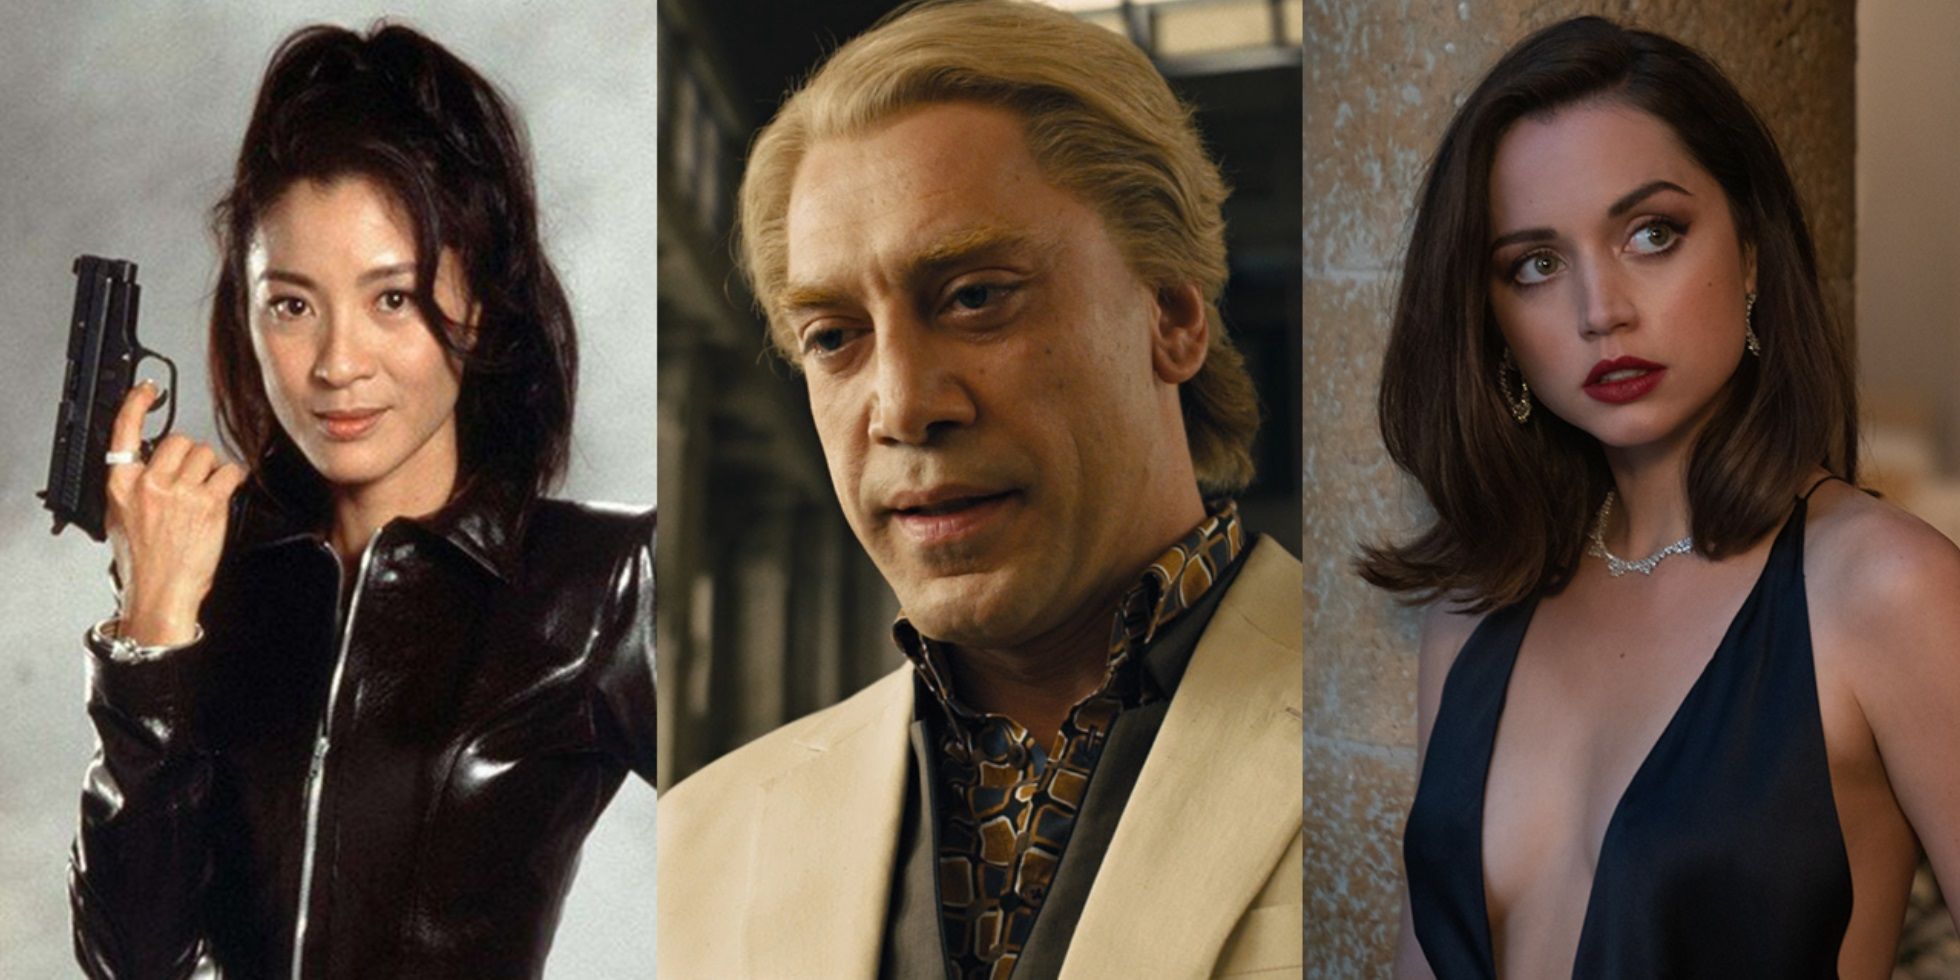 Split image of Wai Lin in Tomorrow Never Dies, Silva in Skyfall, and Paloma in No Time to Die